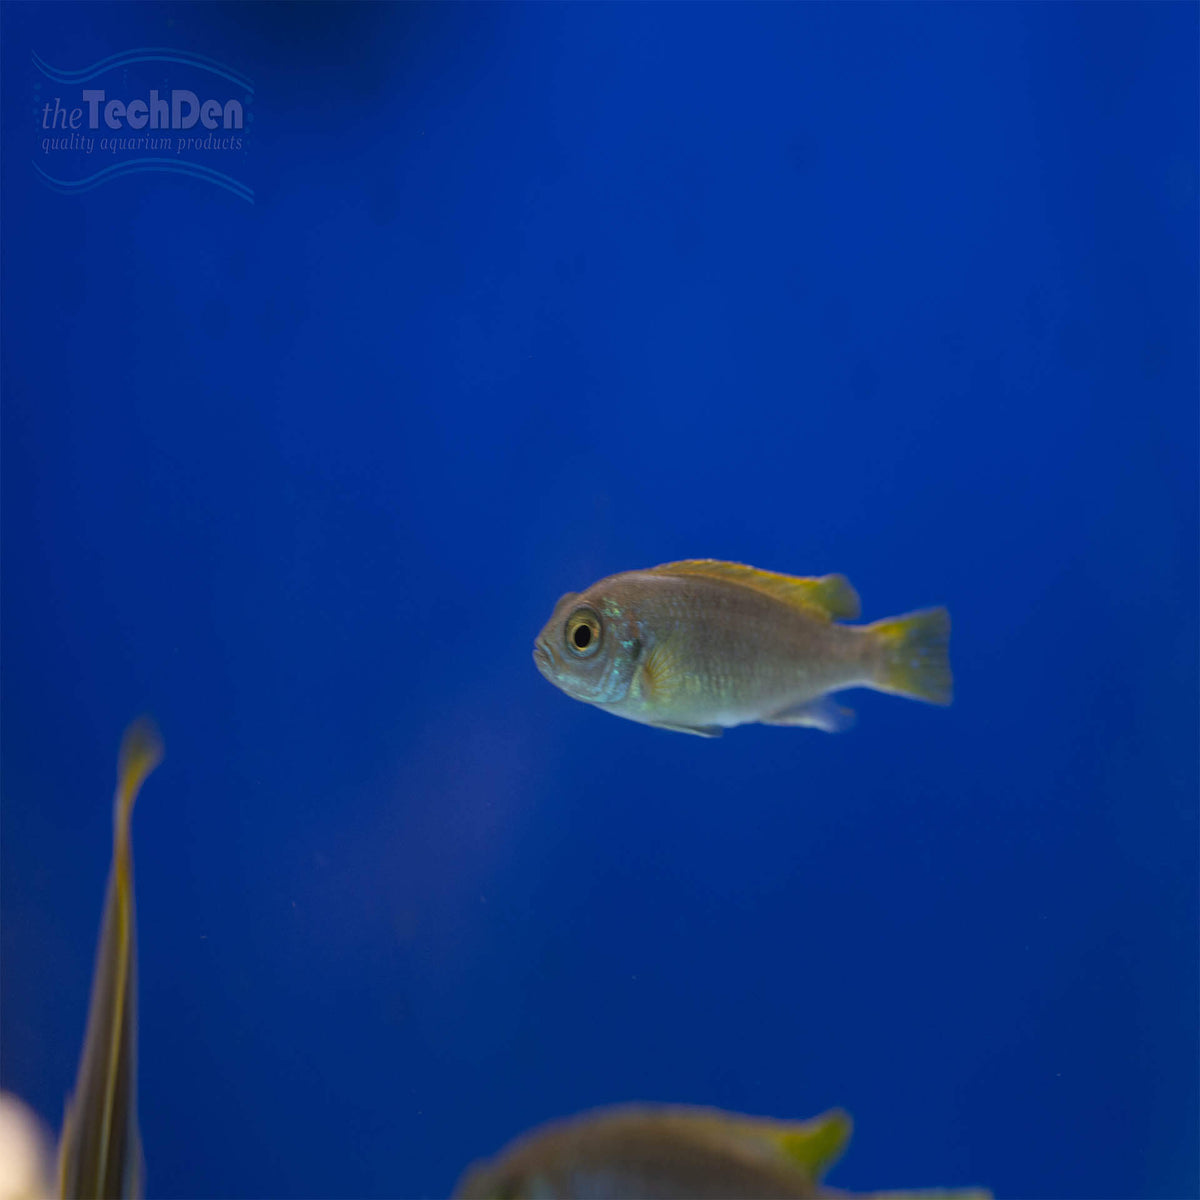 Yellow Tail Acei Cichlid - Pseudotropheus sp. Yellow Tail Acei (No Online Purchases)